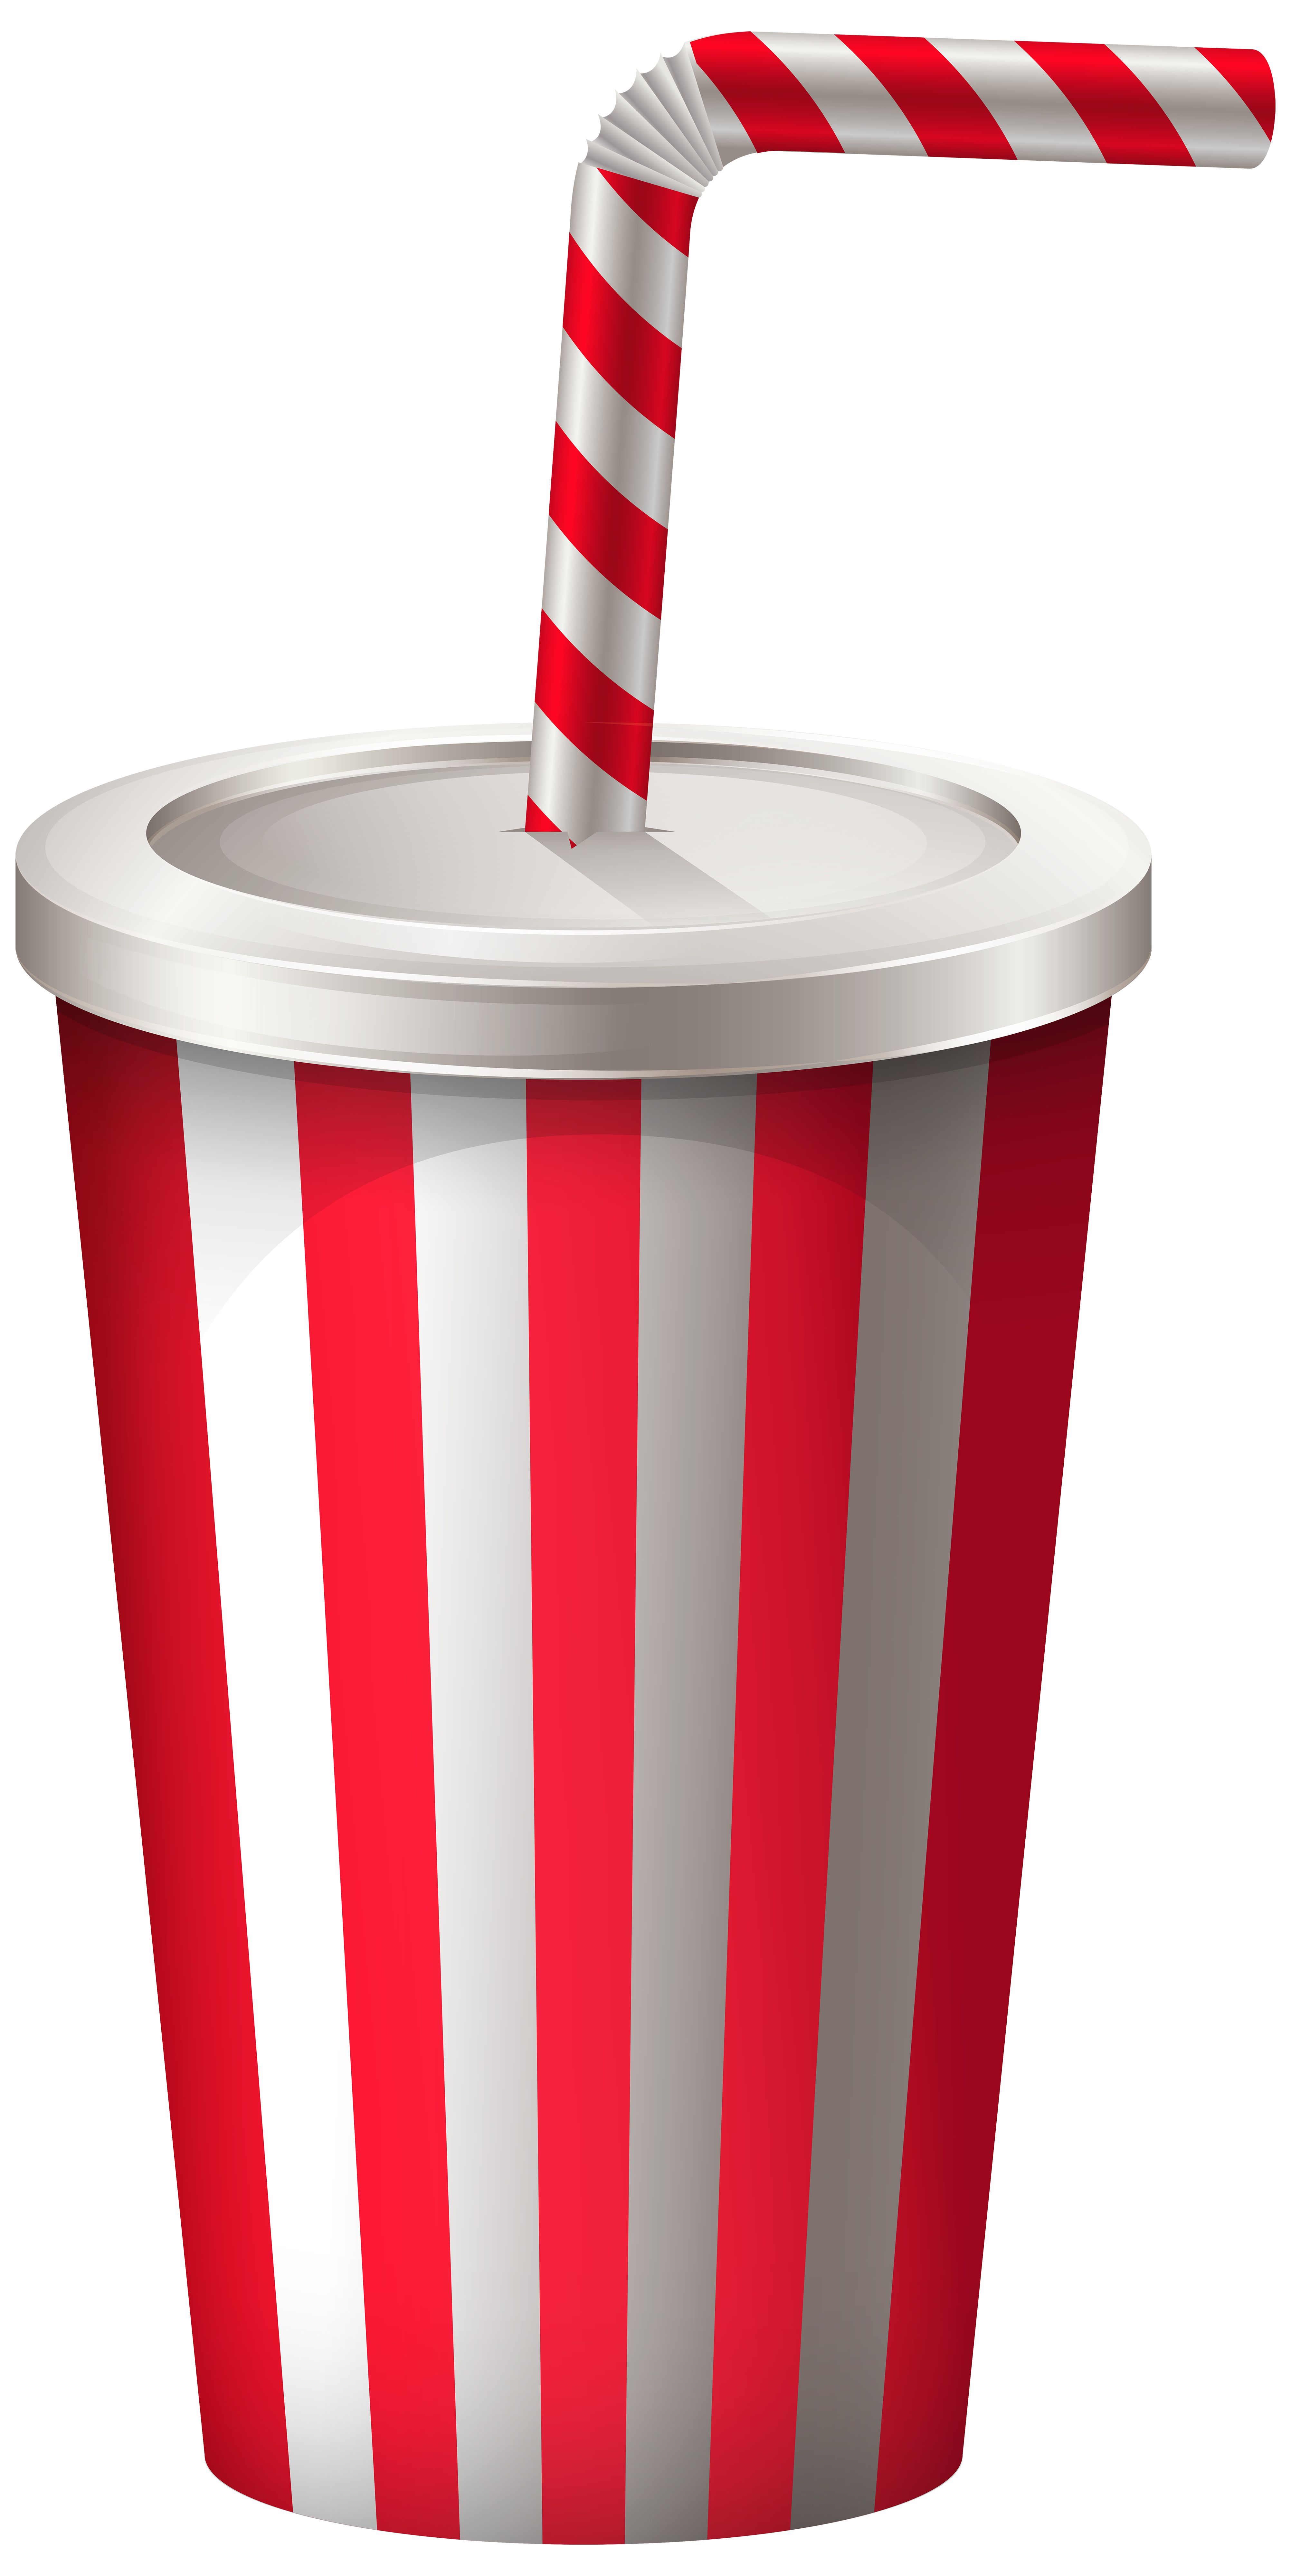 Drink Cup with Straw PNG Transparent Clip Art Image.